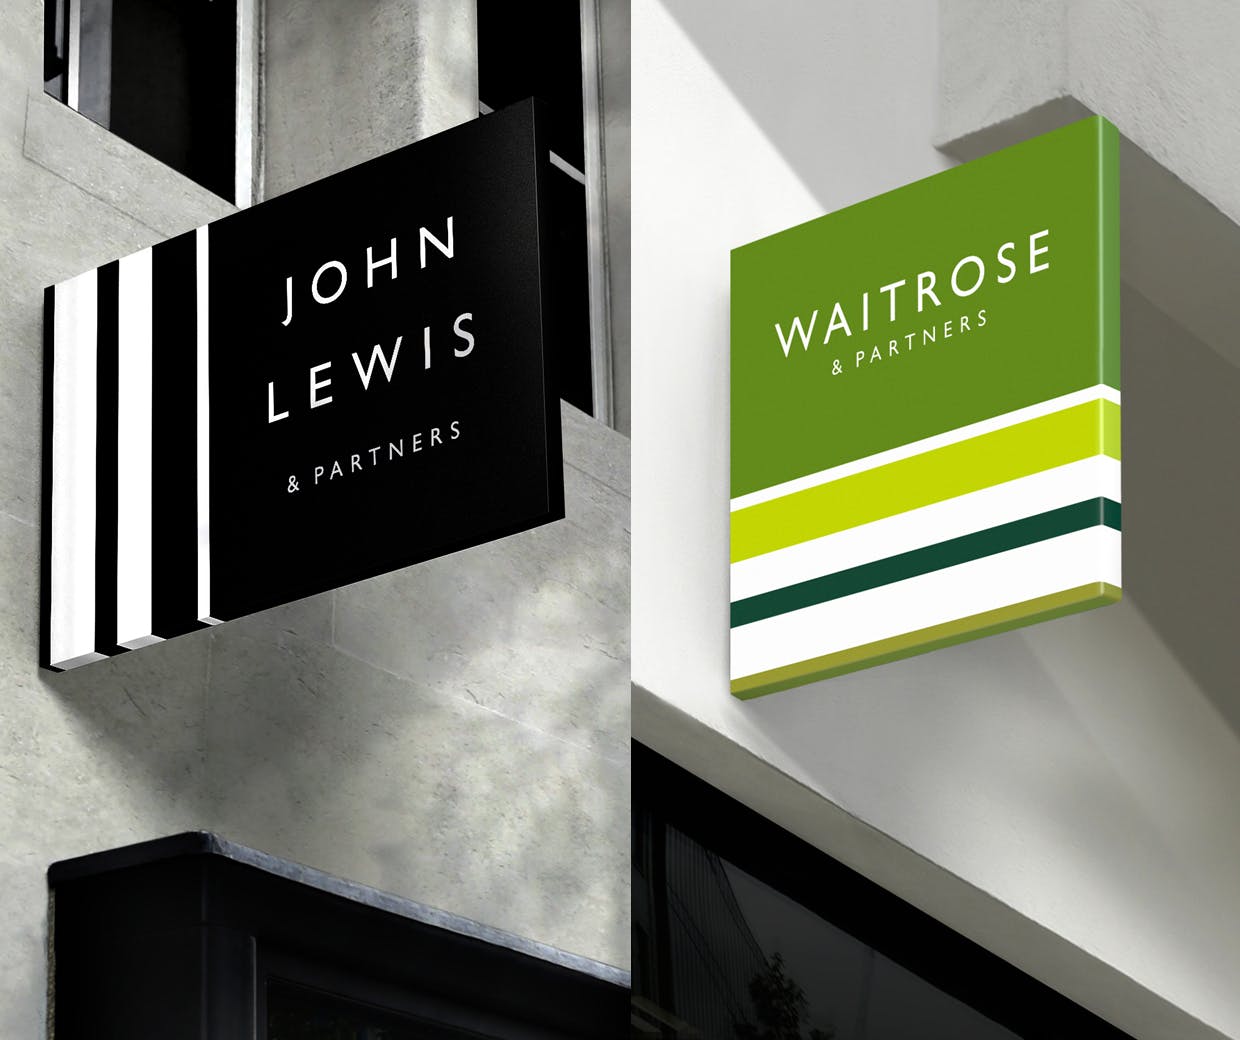 Is John Lewis and Waitrose's joint marketing strategy working?